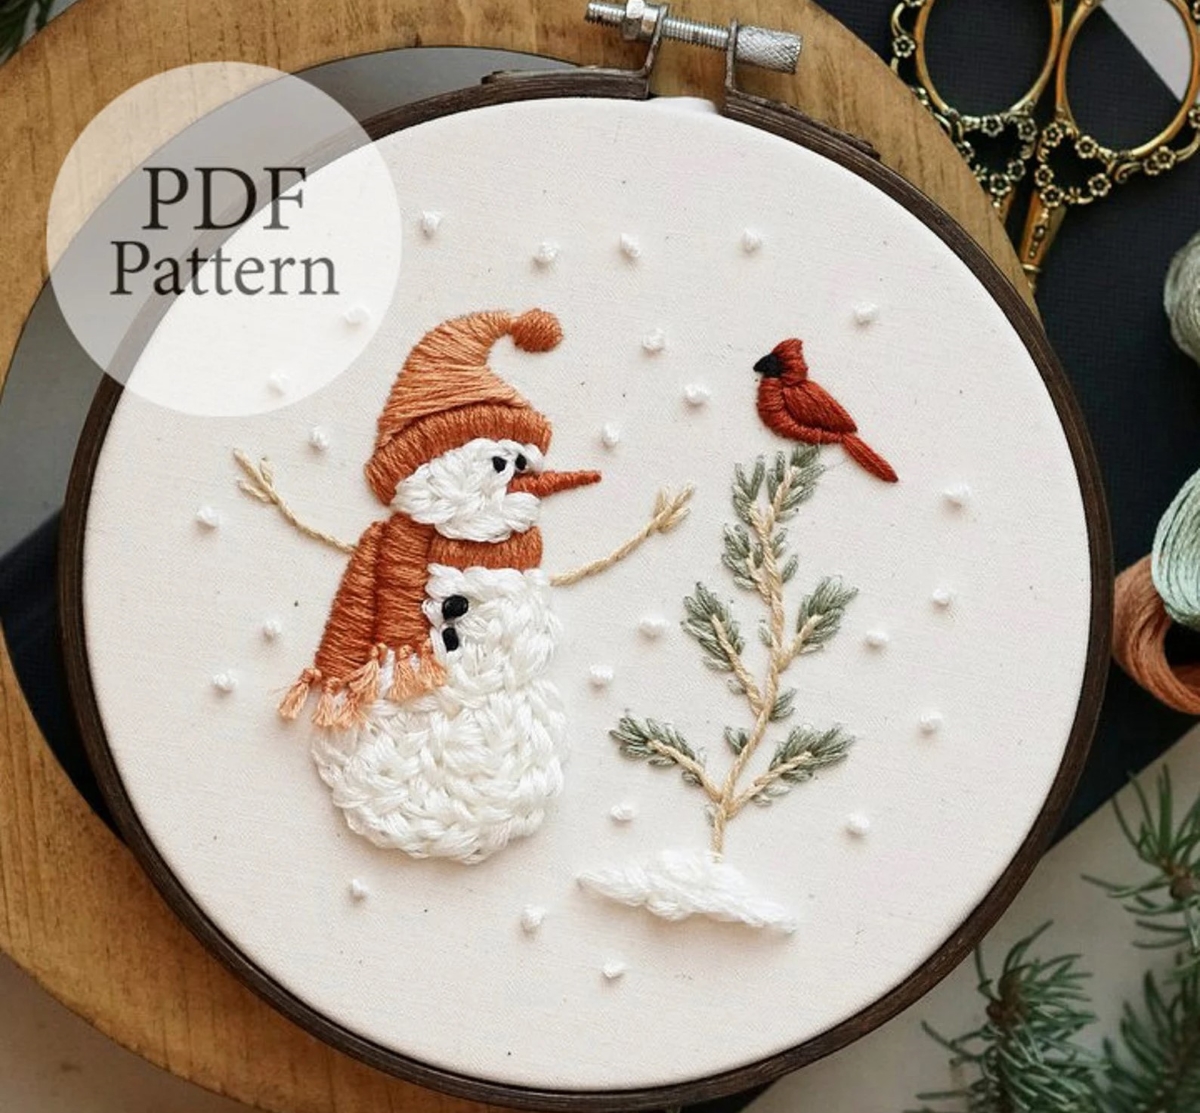 Snowman embroidery